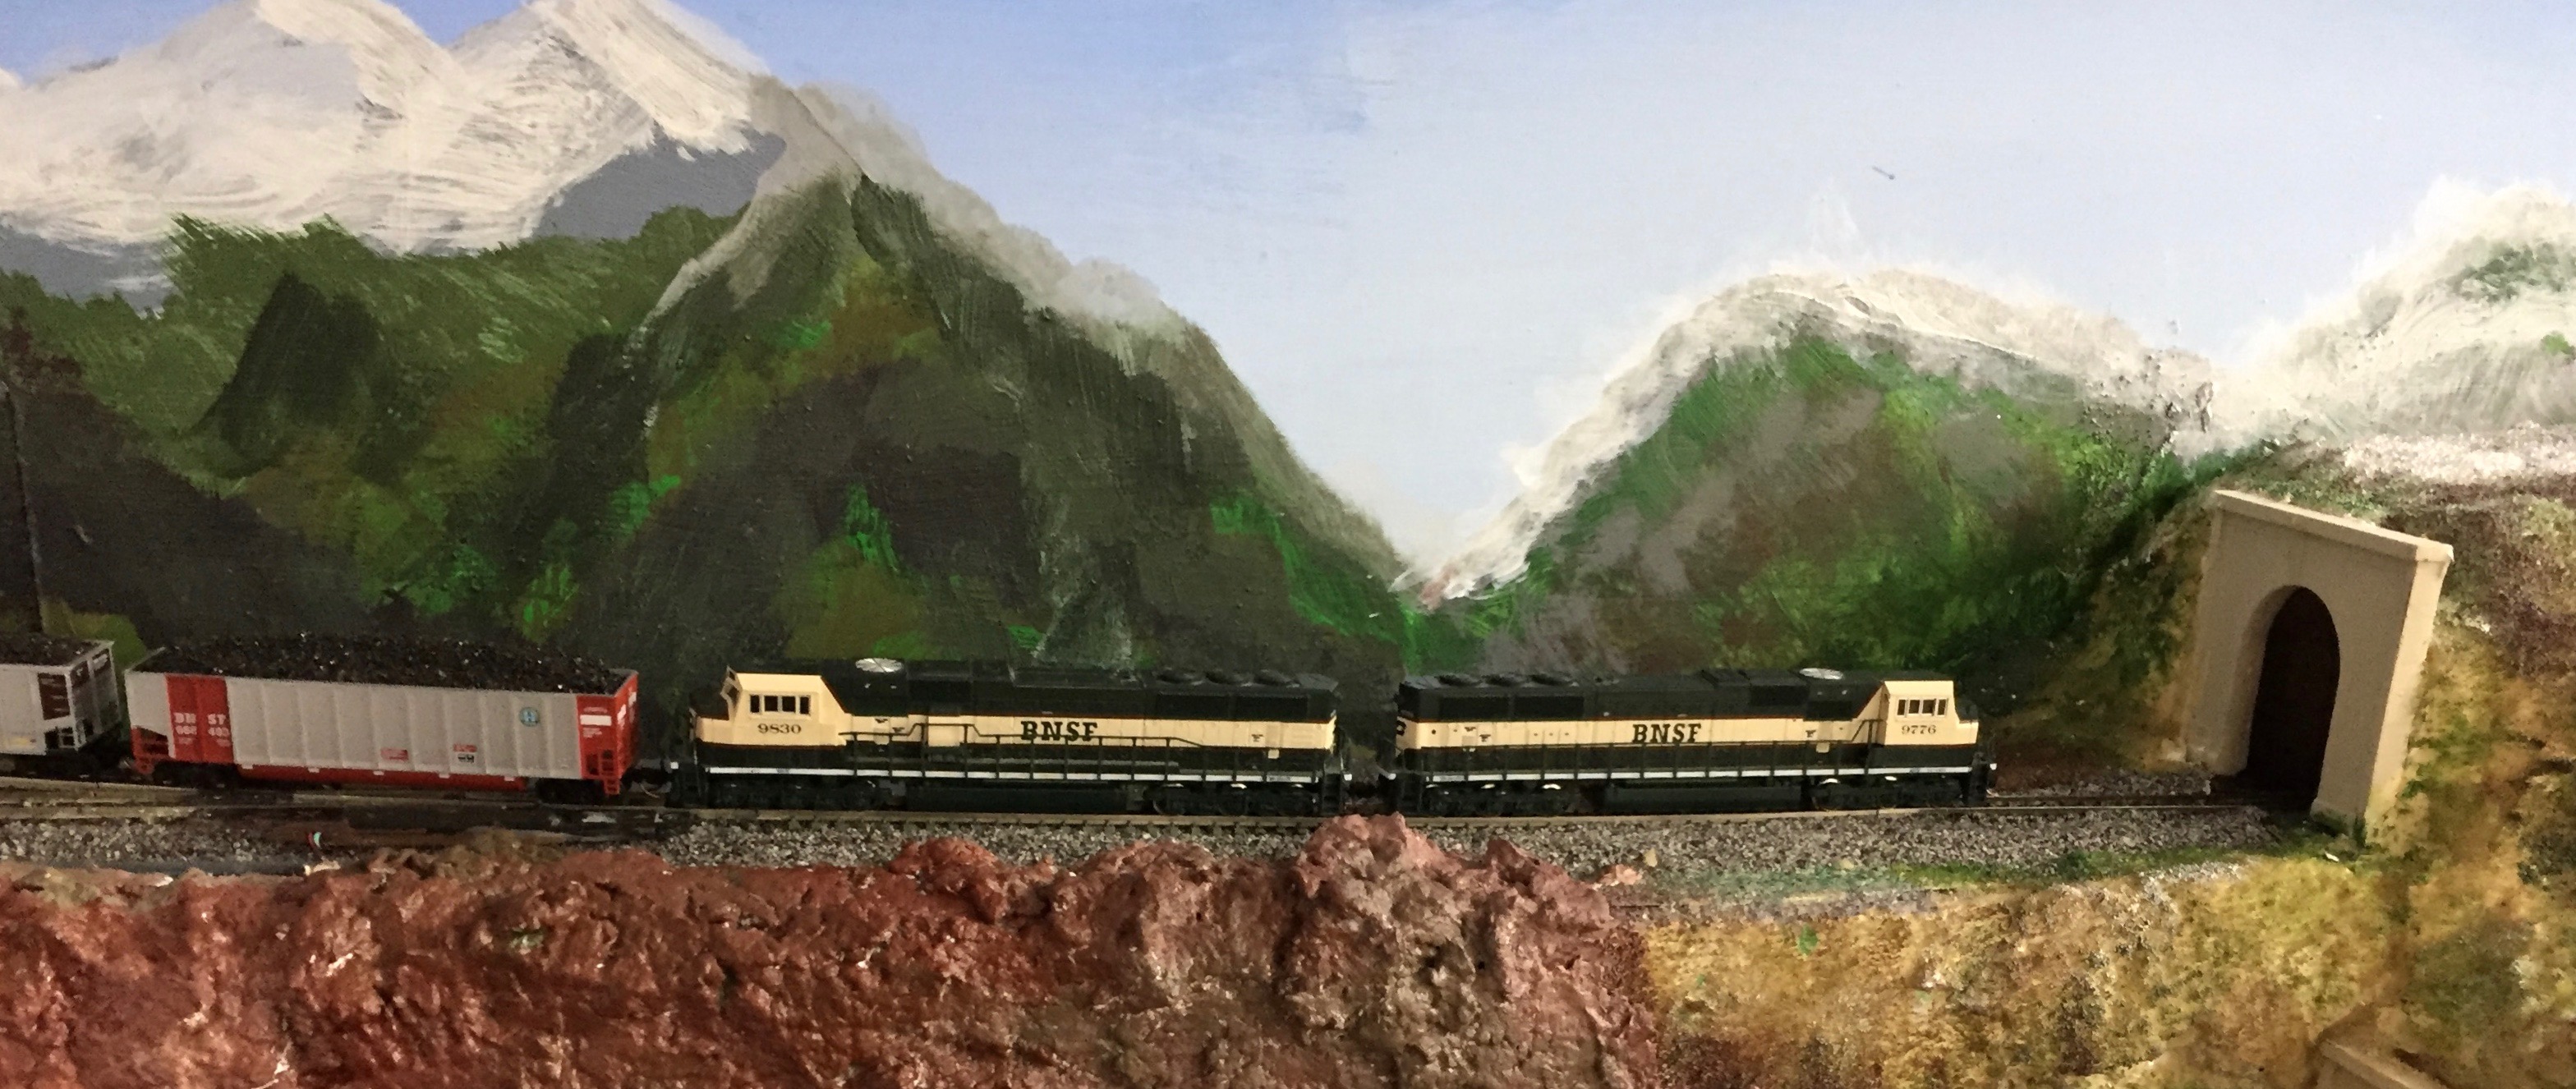 Two 70 MACs lead a unit coal train into a tunnel on the N Scale layout.